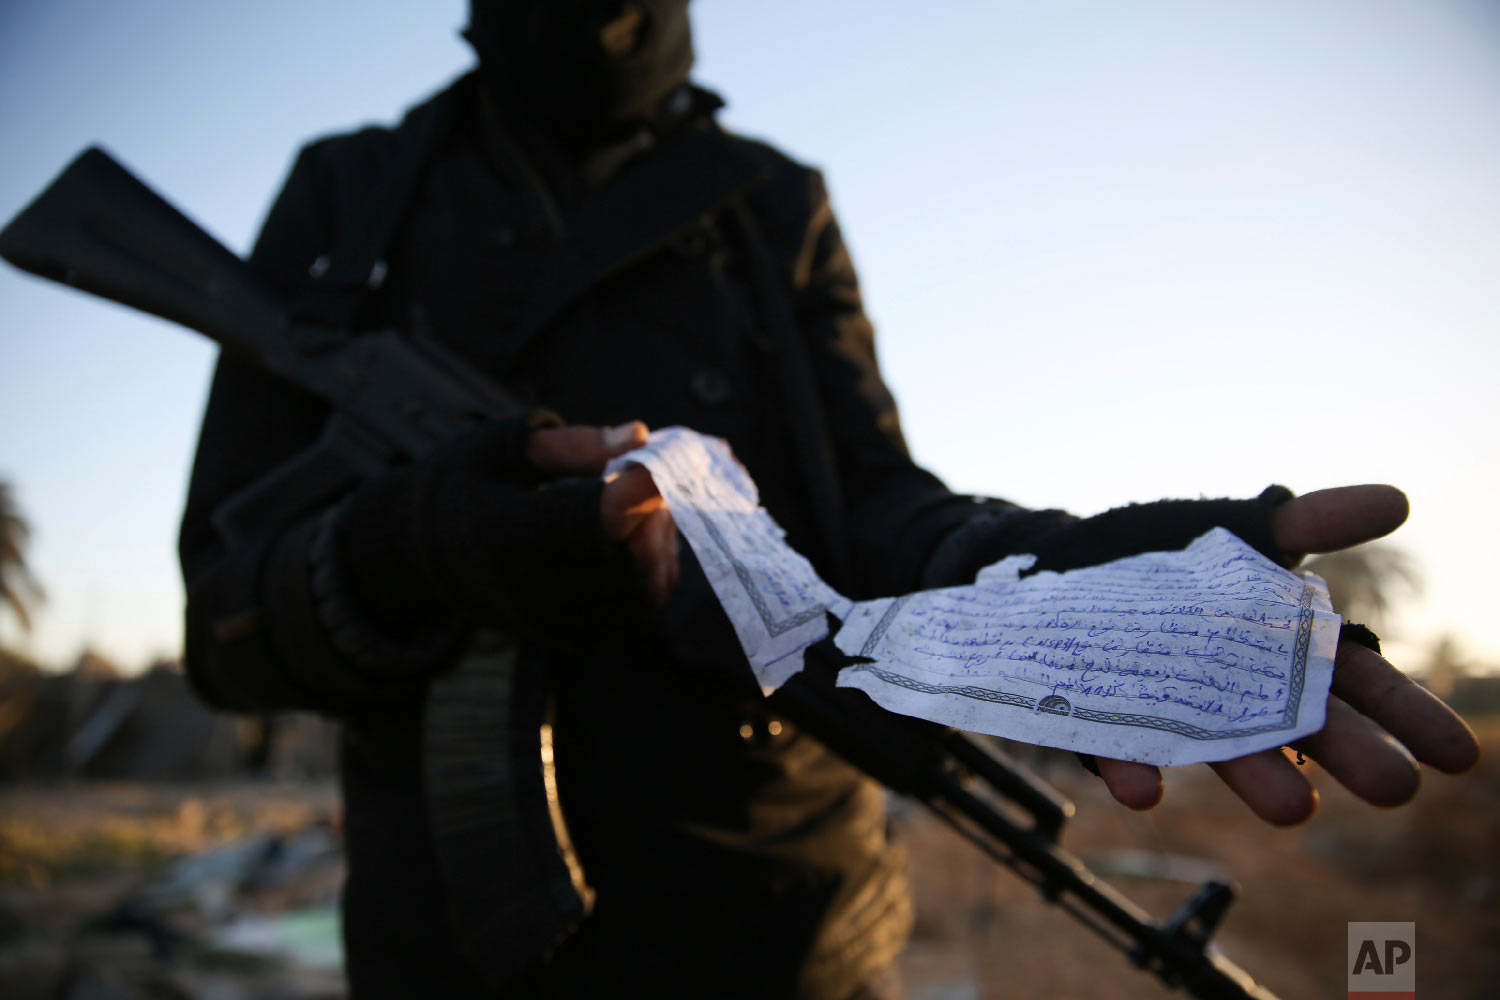  A member of the Libyan security forces displays part of a document in Arabic describing weaponry, that was found at the site of U.S. airstrikes on an Islamic State camp that killed dozens, near the western city of Sabratha, Libya, Feb. 20, 2016. (AP